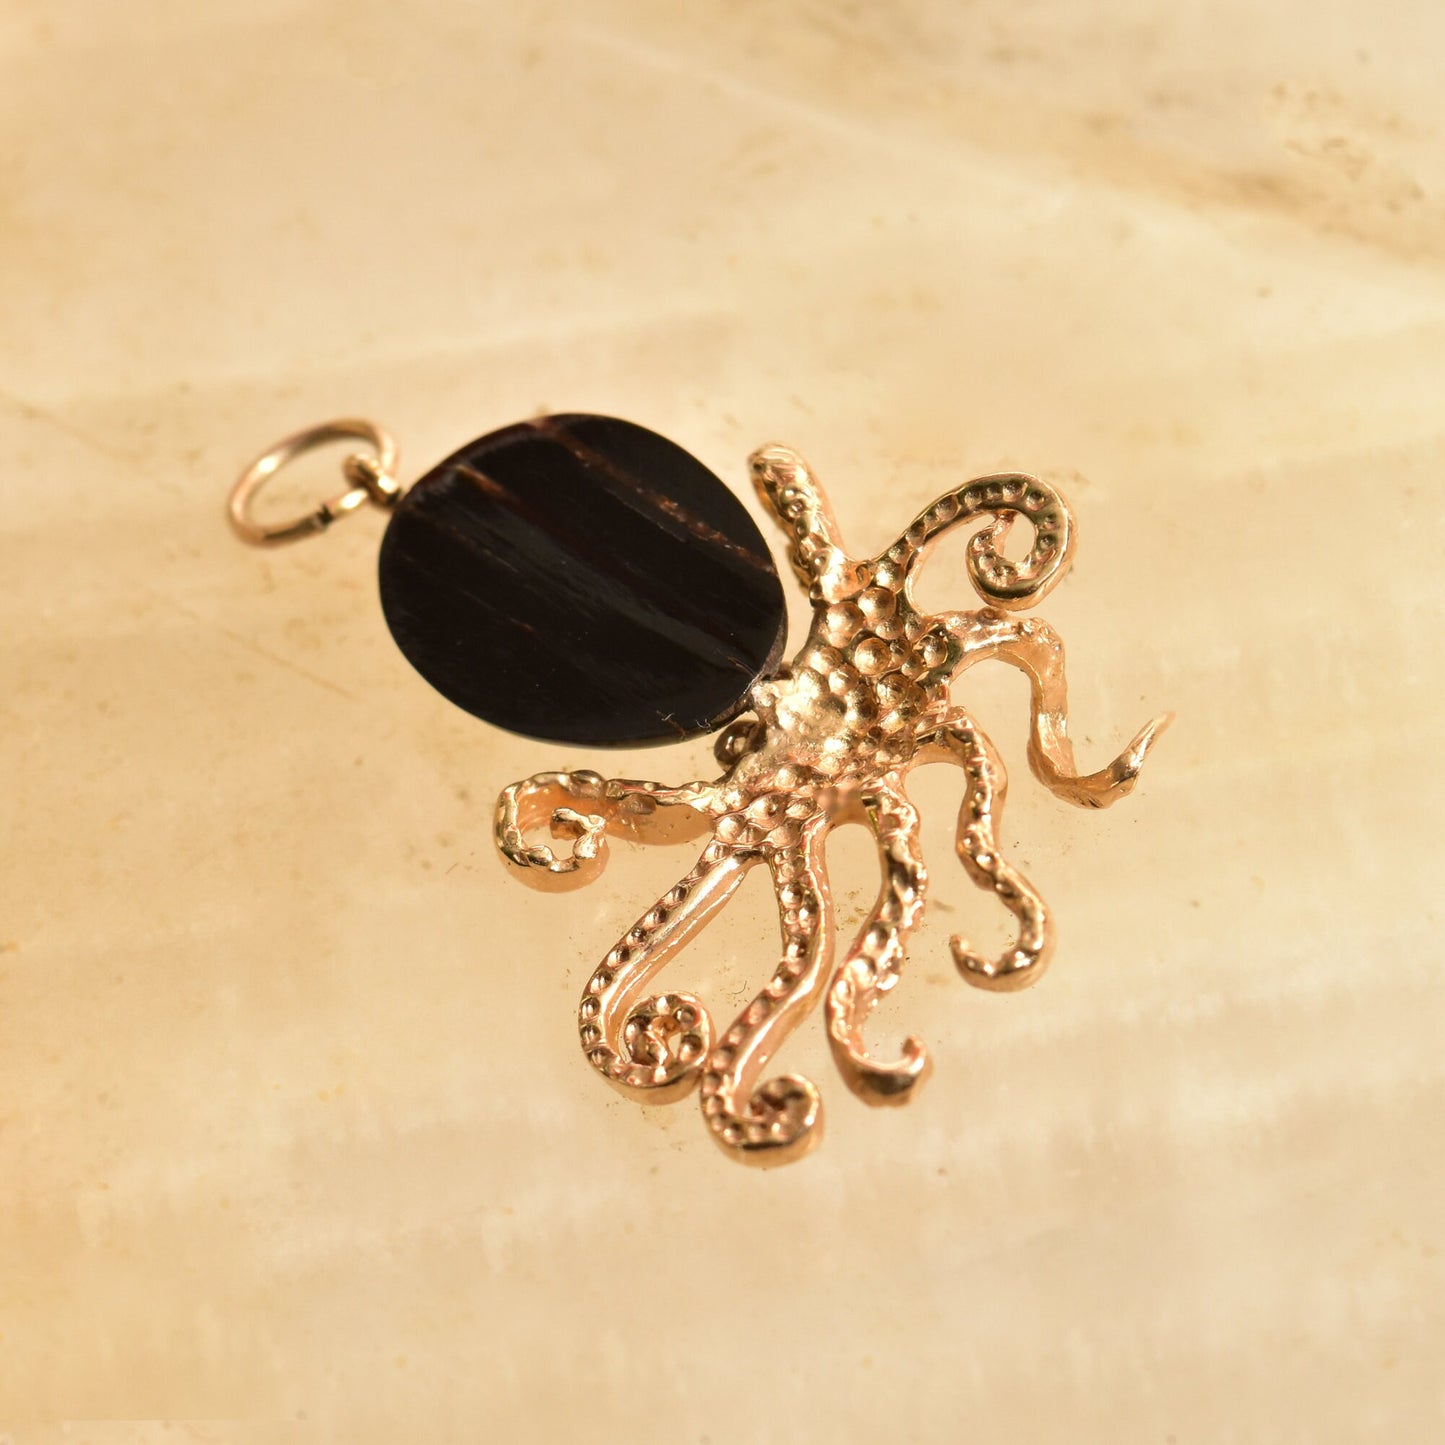 10K yellow gold octopus pendant with black coral body and diamond-encrusted accents, intricate 3D aquatic jewelry design